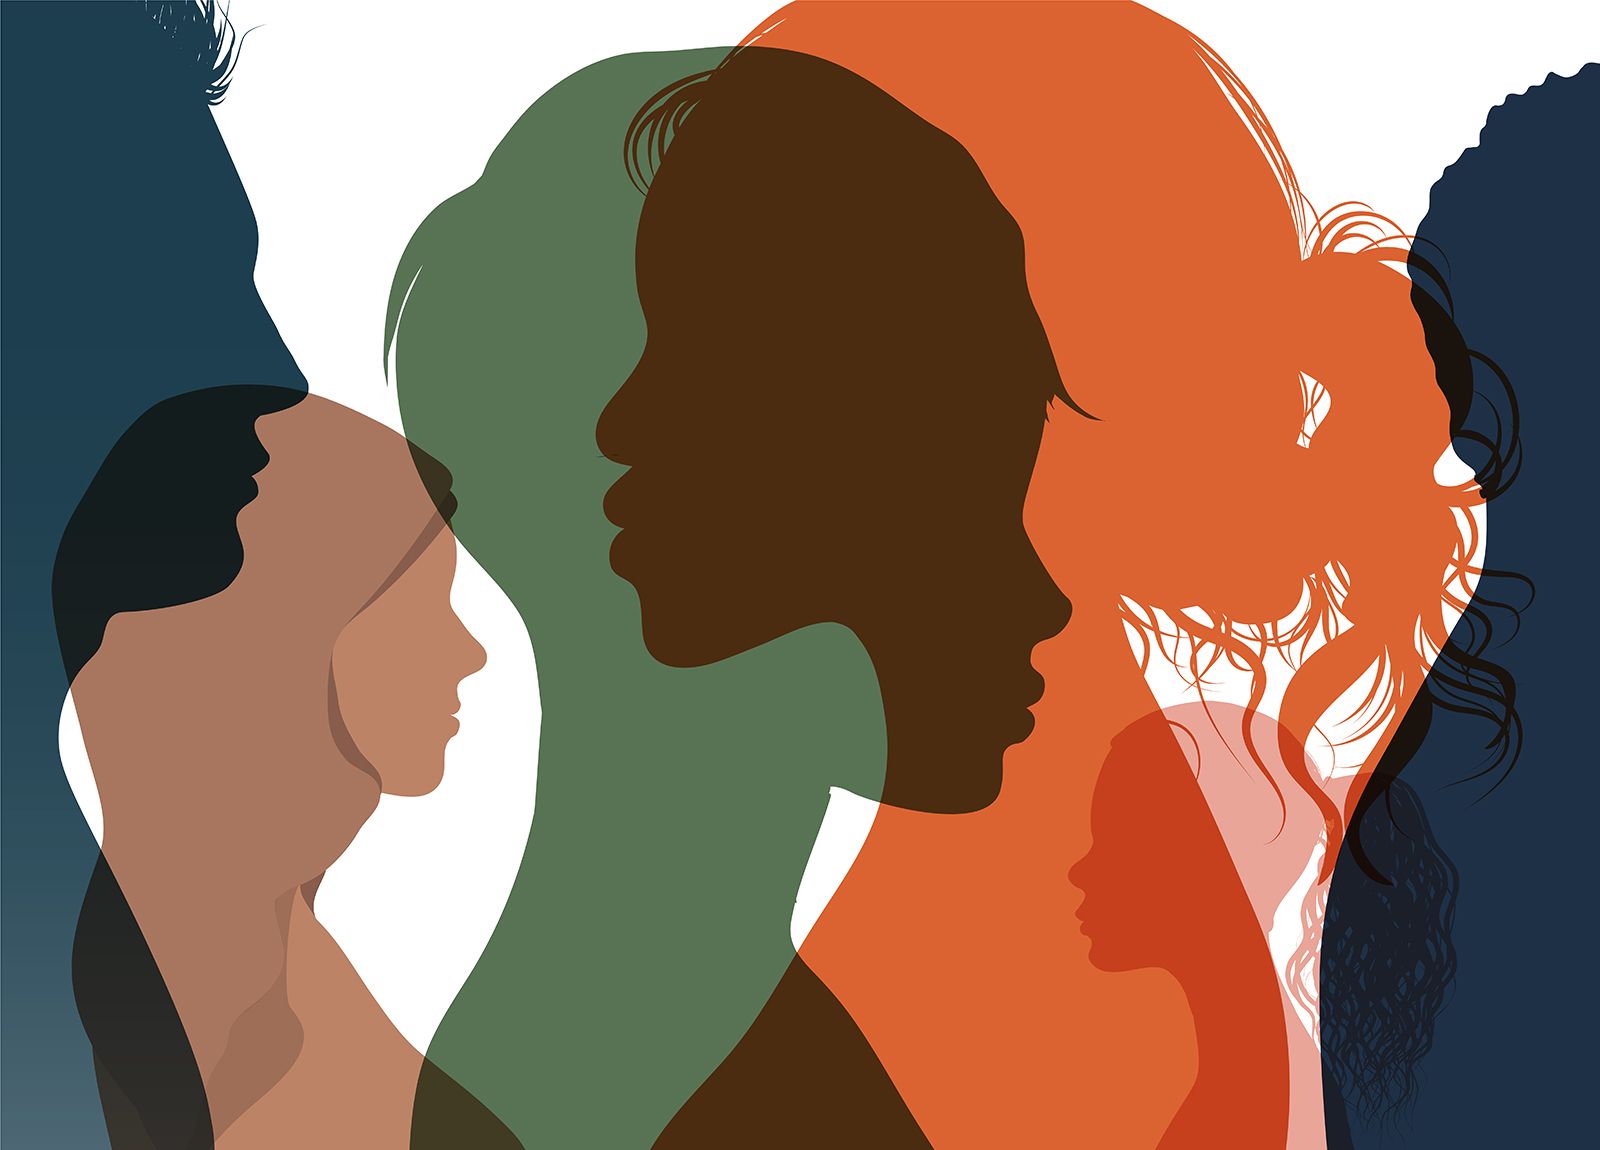 Silhouettes of diverse people